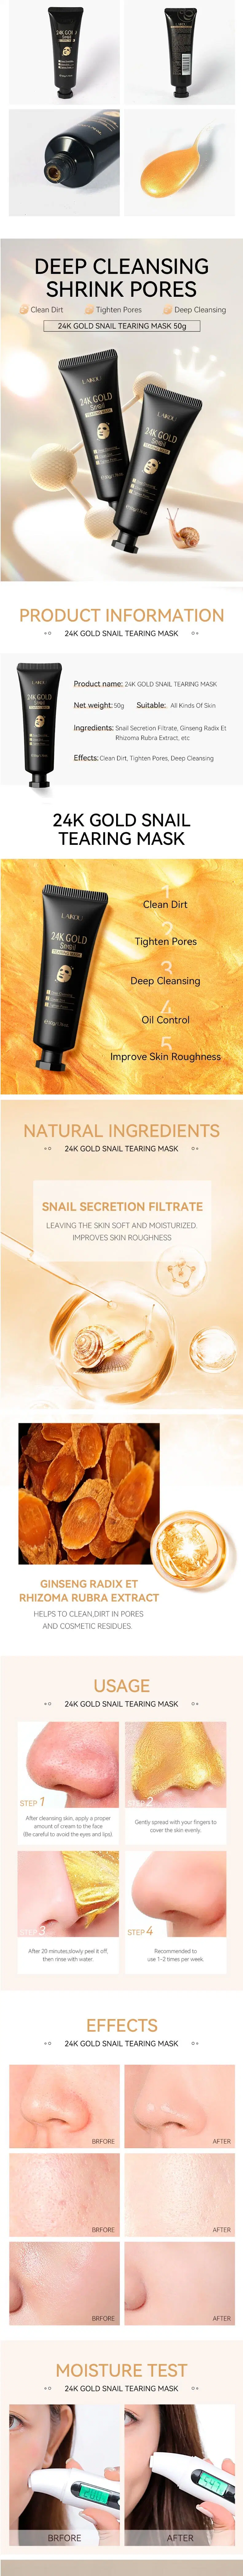 24K Gold Snail Tearing Mask Deep Cleaning Moisturizing Oil Controlling Blackhead Removing Pore Tightening Face Cream Mask